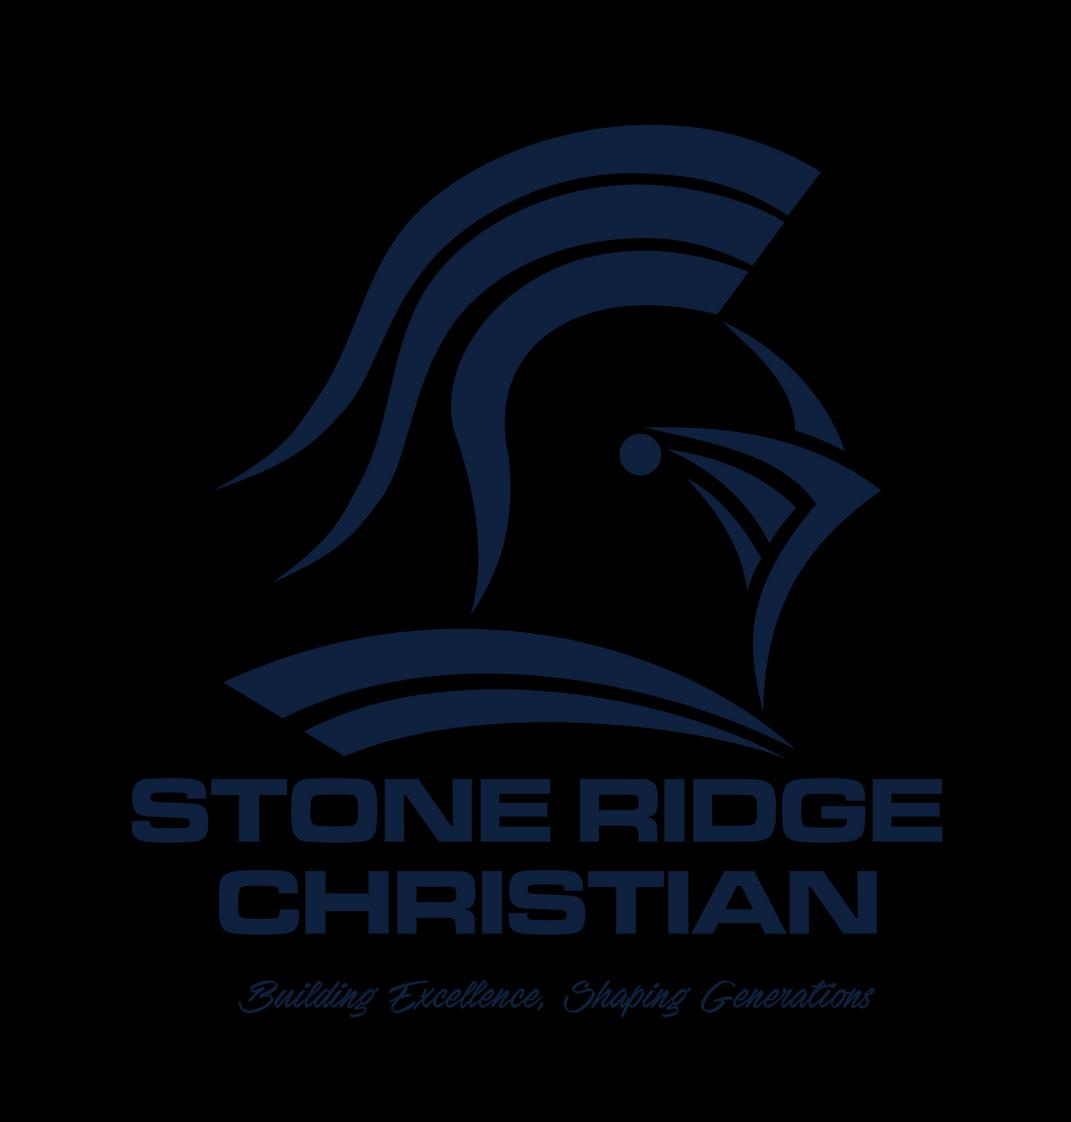 Stone Ridge Christian Elementary School Photo #1 - We are a PK-5th grade campus of a PK-12th grade school. We are a Christian School whose goal is to be Christ-Centered and Student-Focused in all that we do.